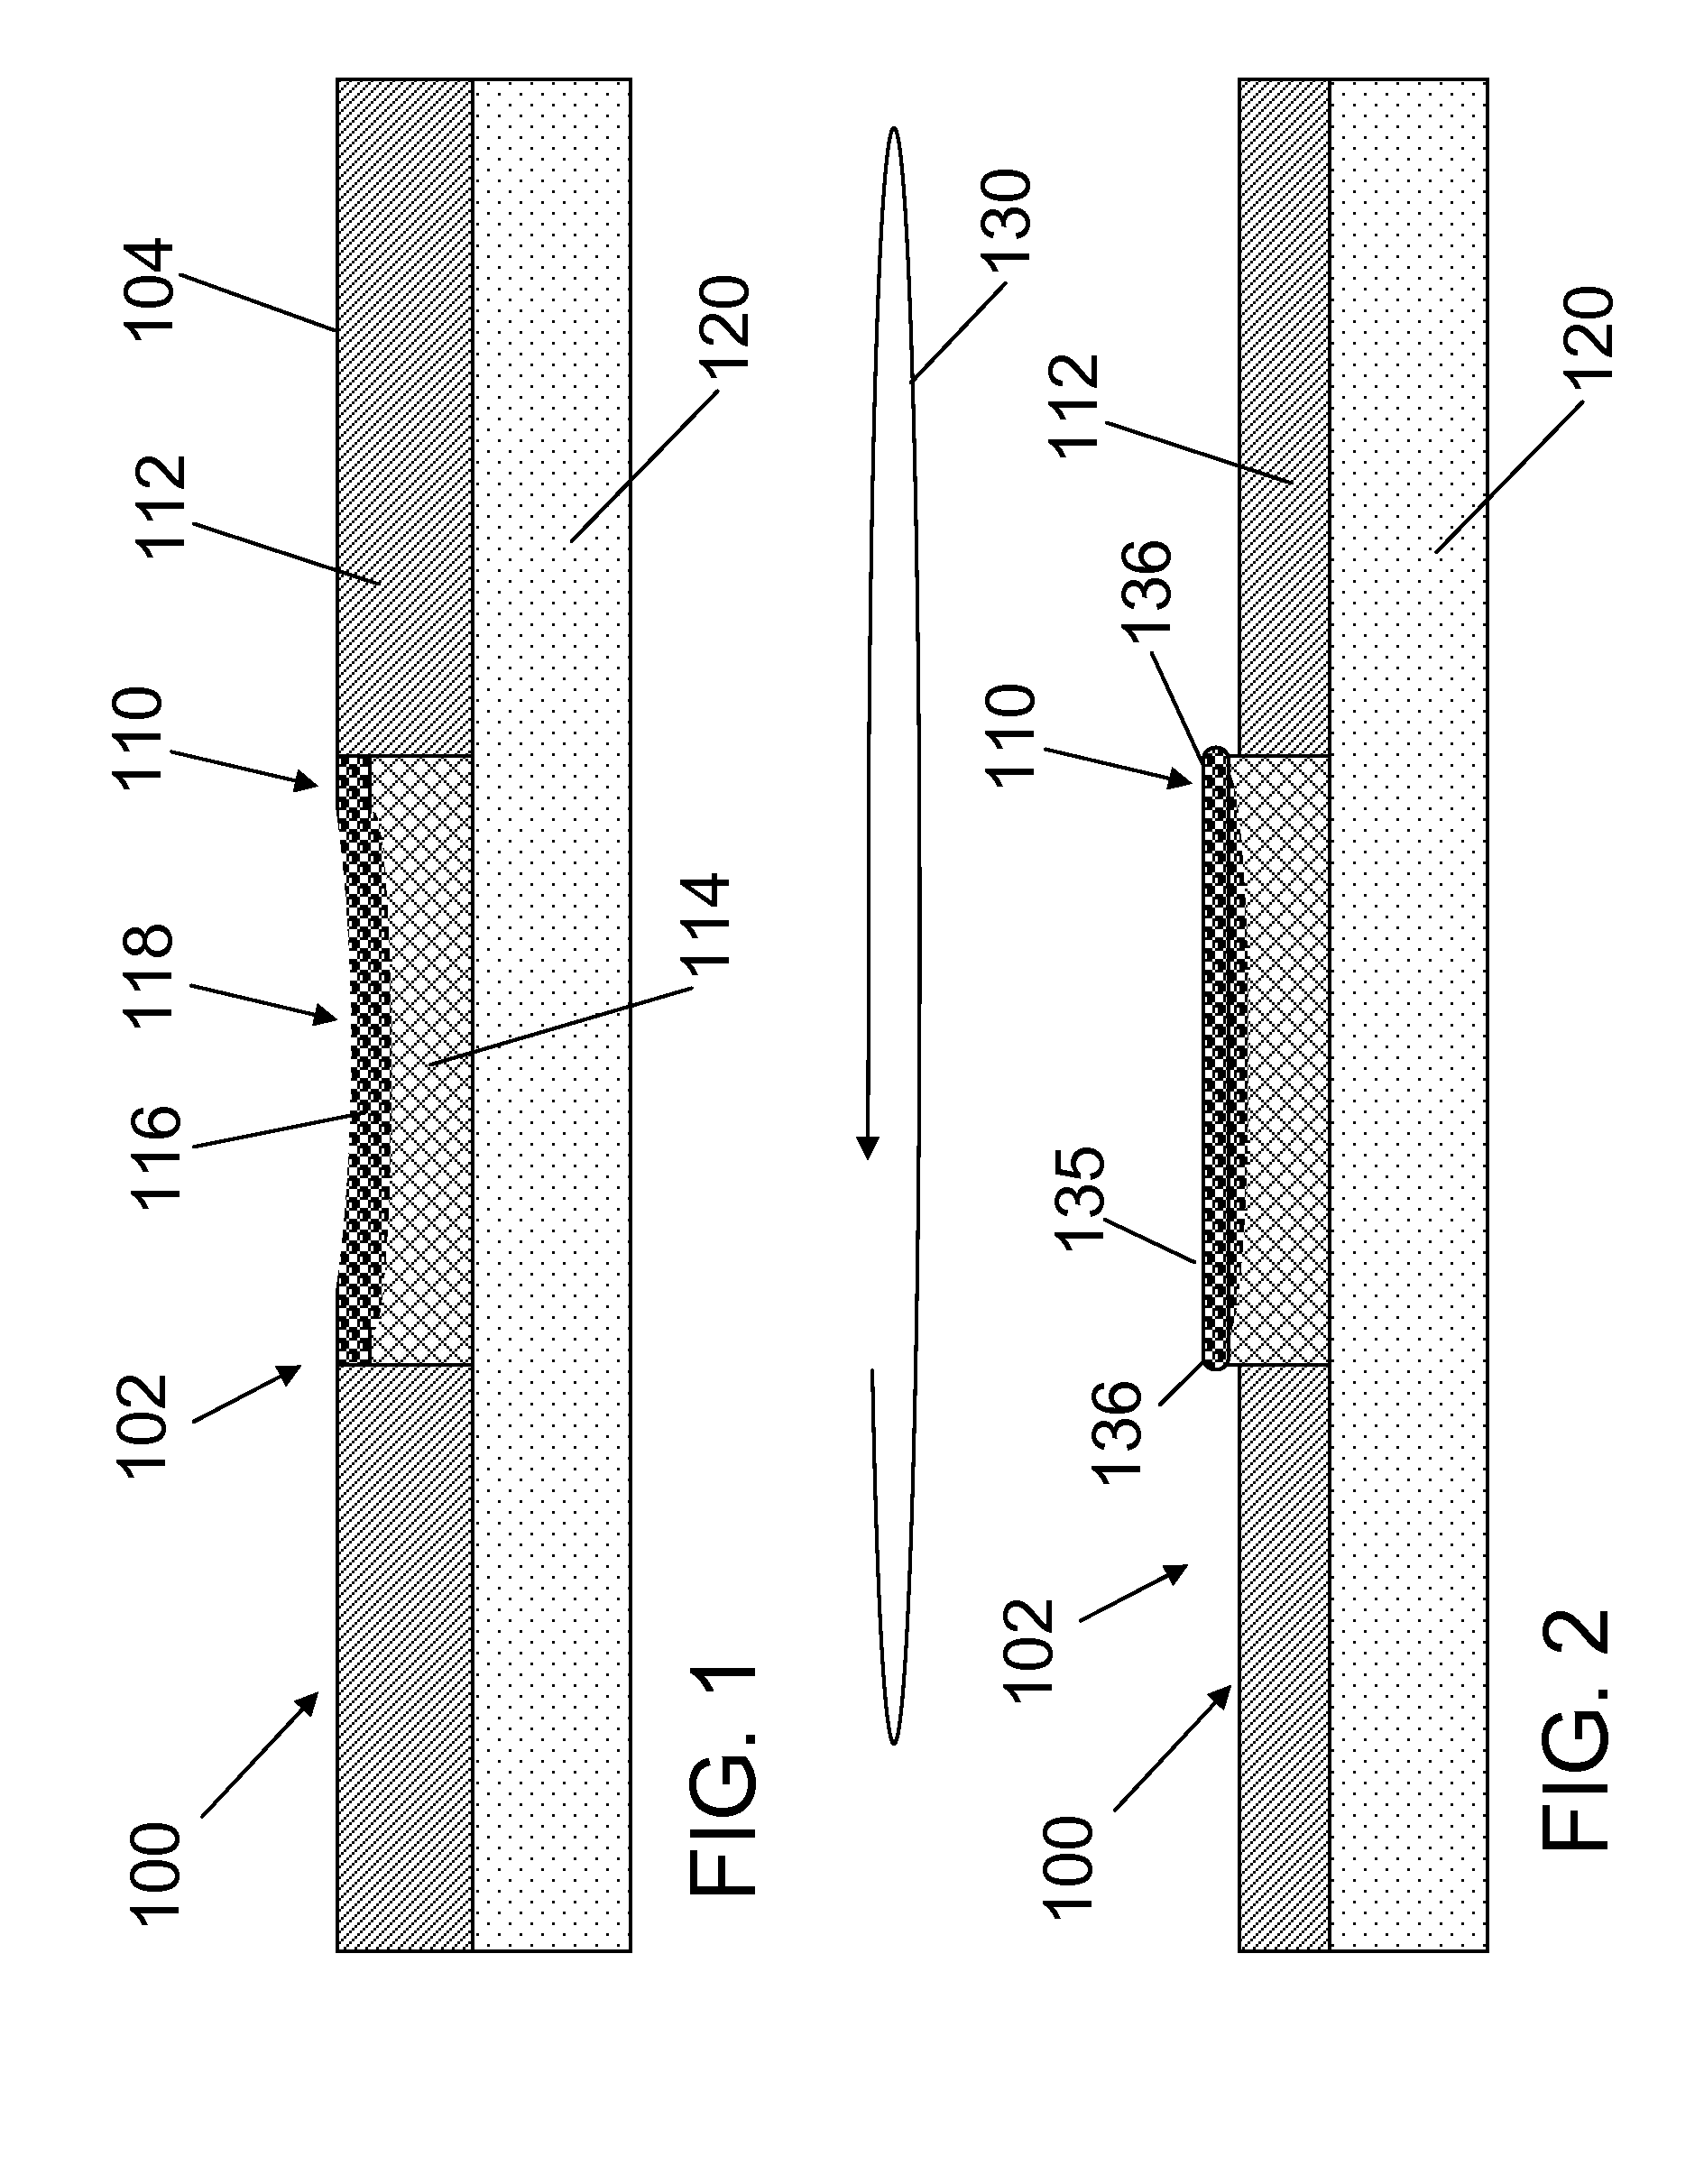 Bonding of substrates including metal-dielectric patterns with metal raised above dielectric